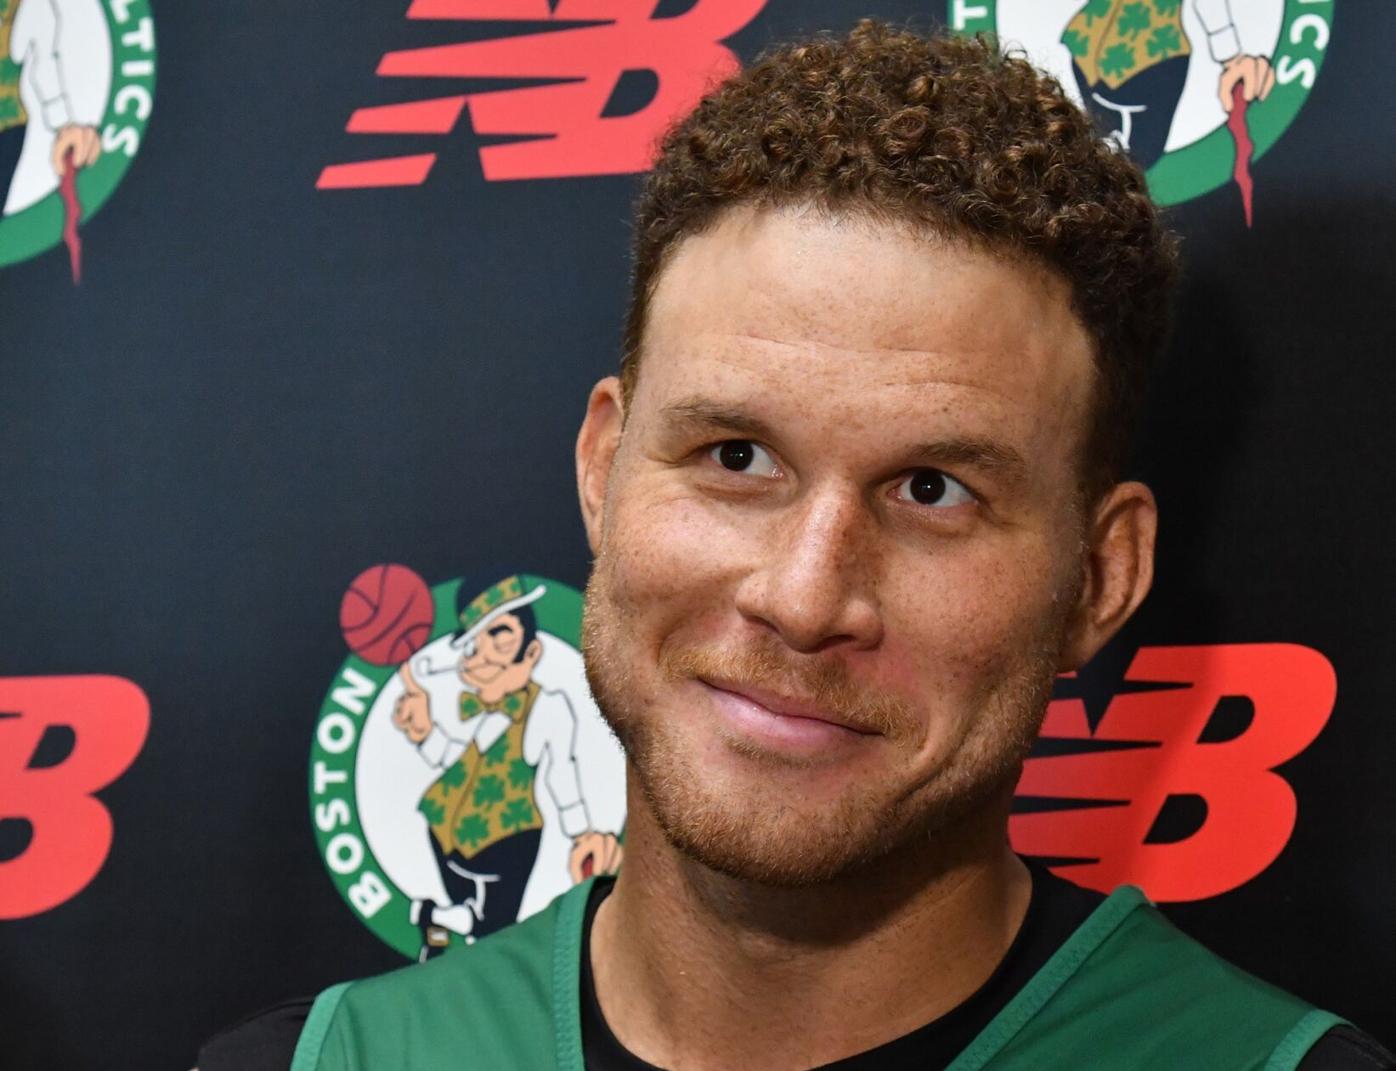 Boston's Blake Griffin on his role with the Celtics this season